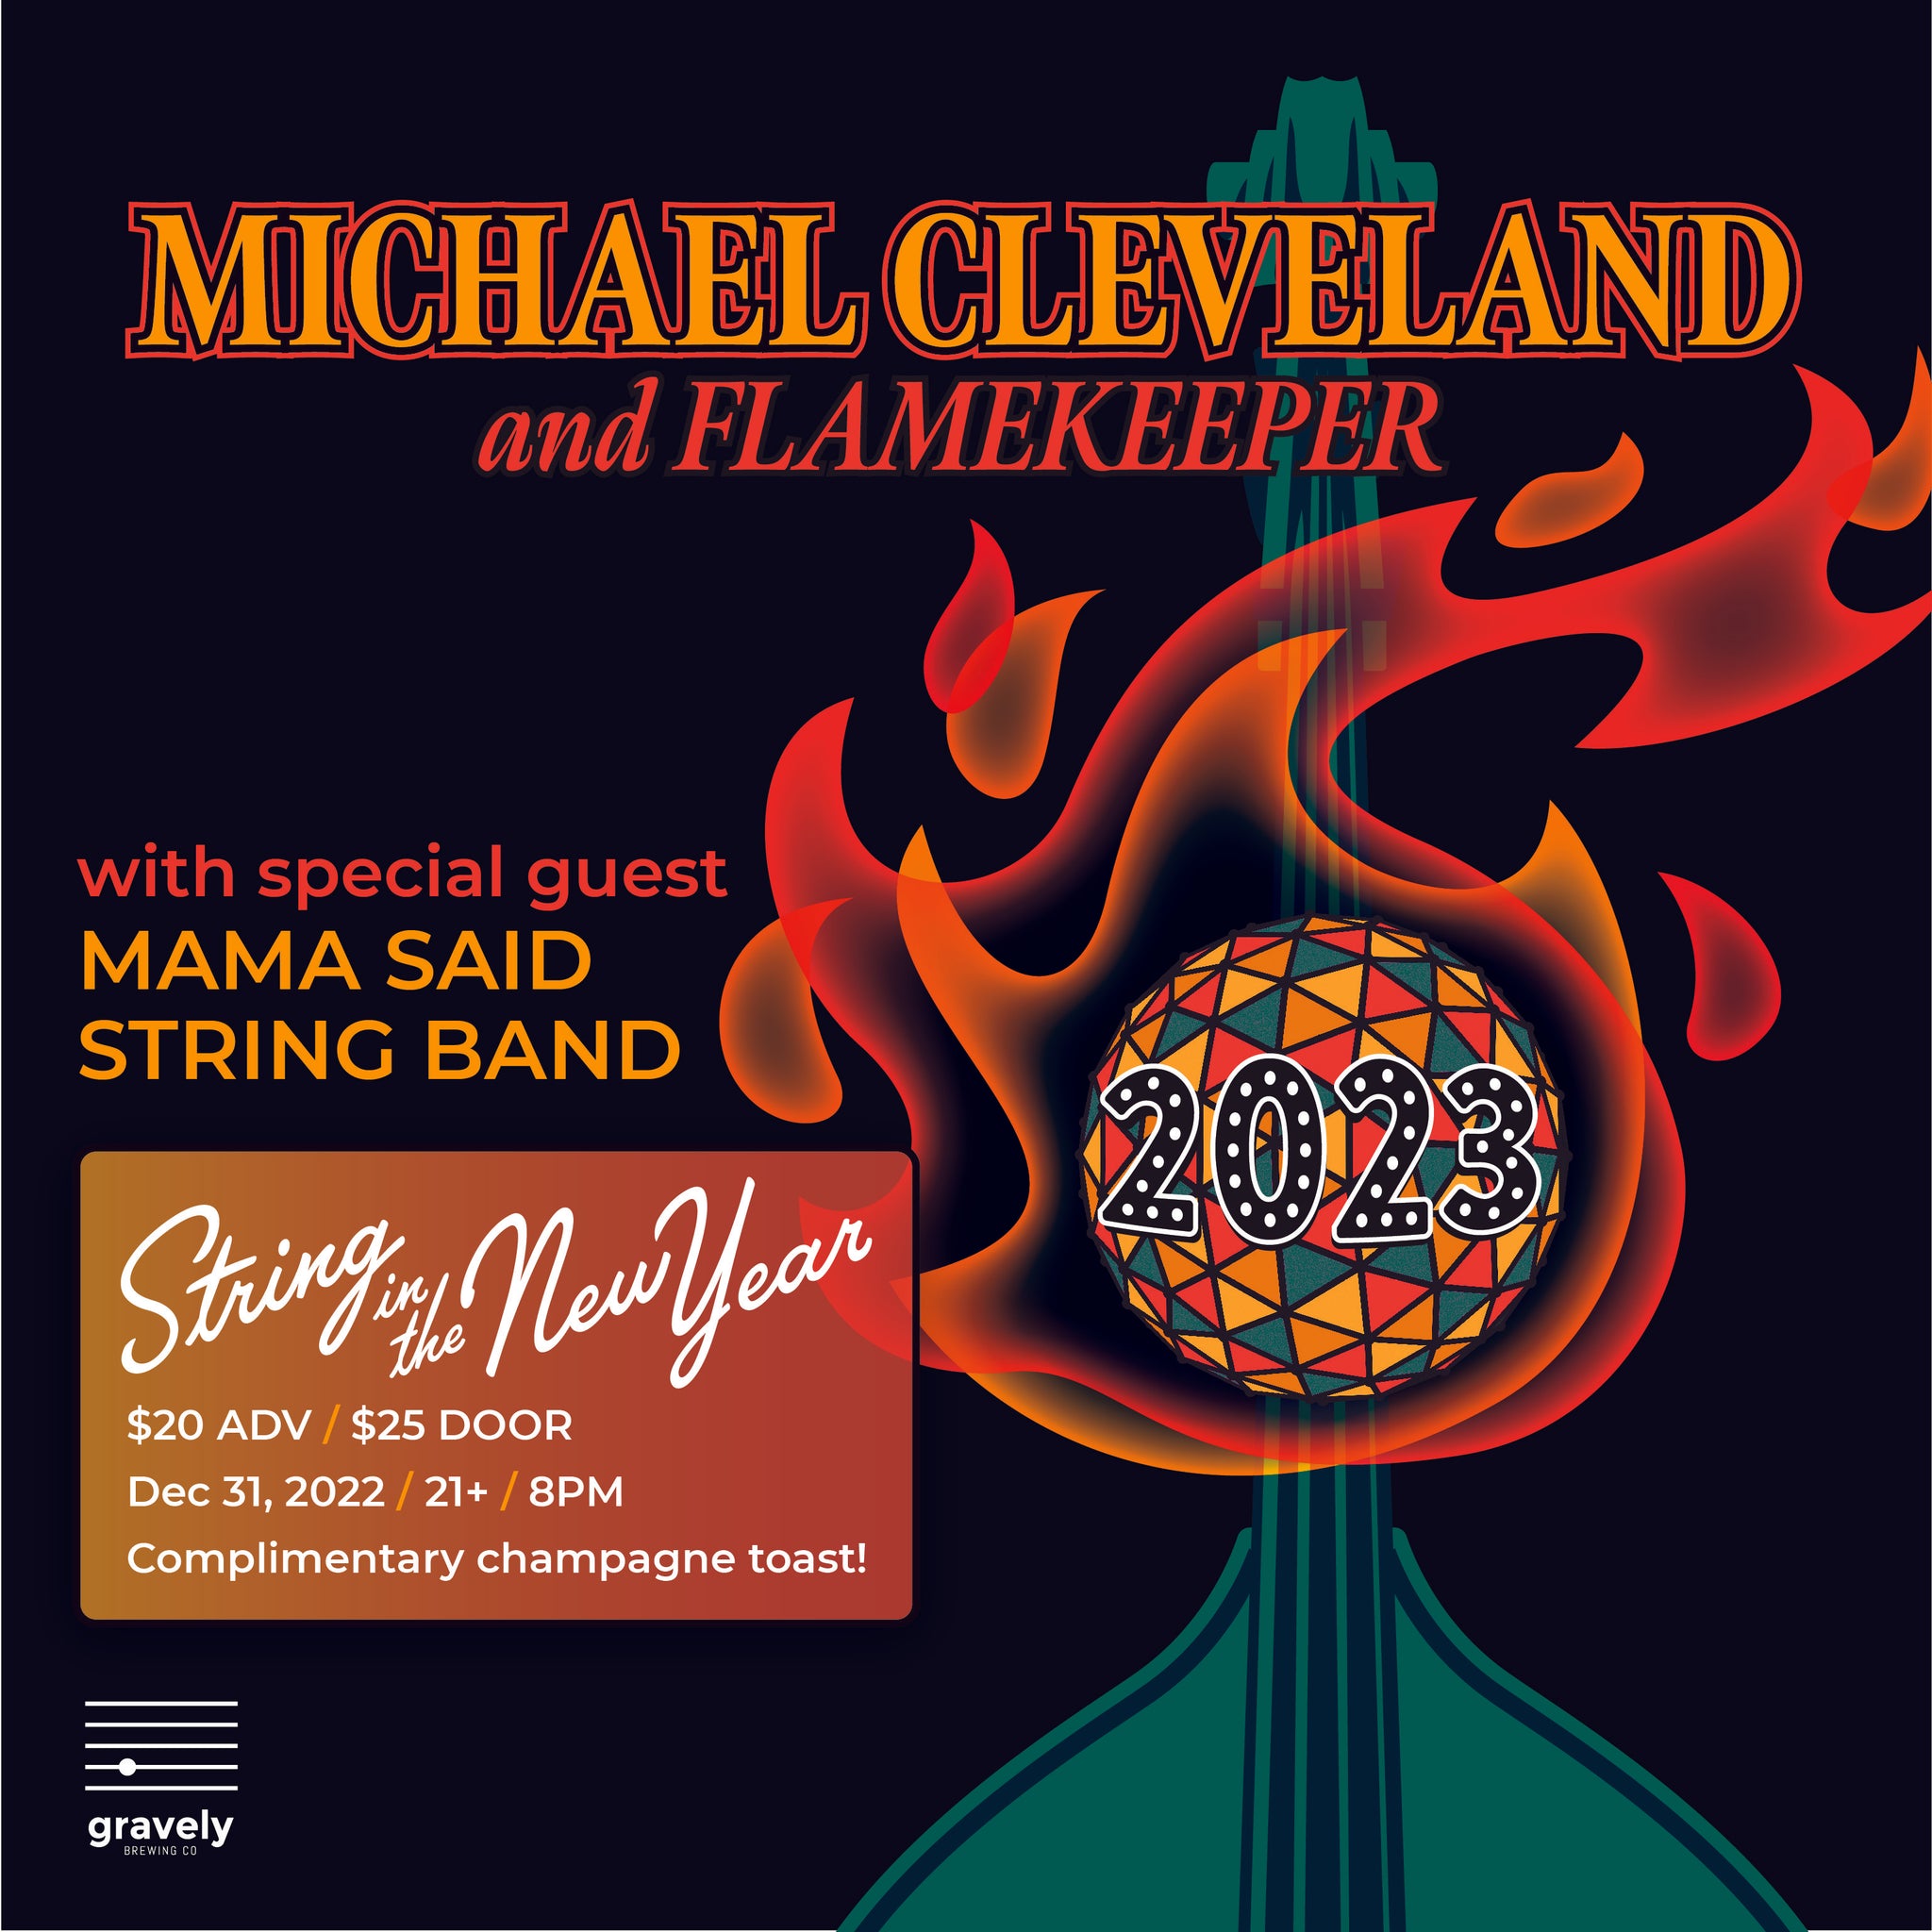 Michael Cleveland & Flamekeeper with Mama Said String Band (New Year's Eve 2022)